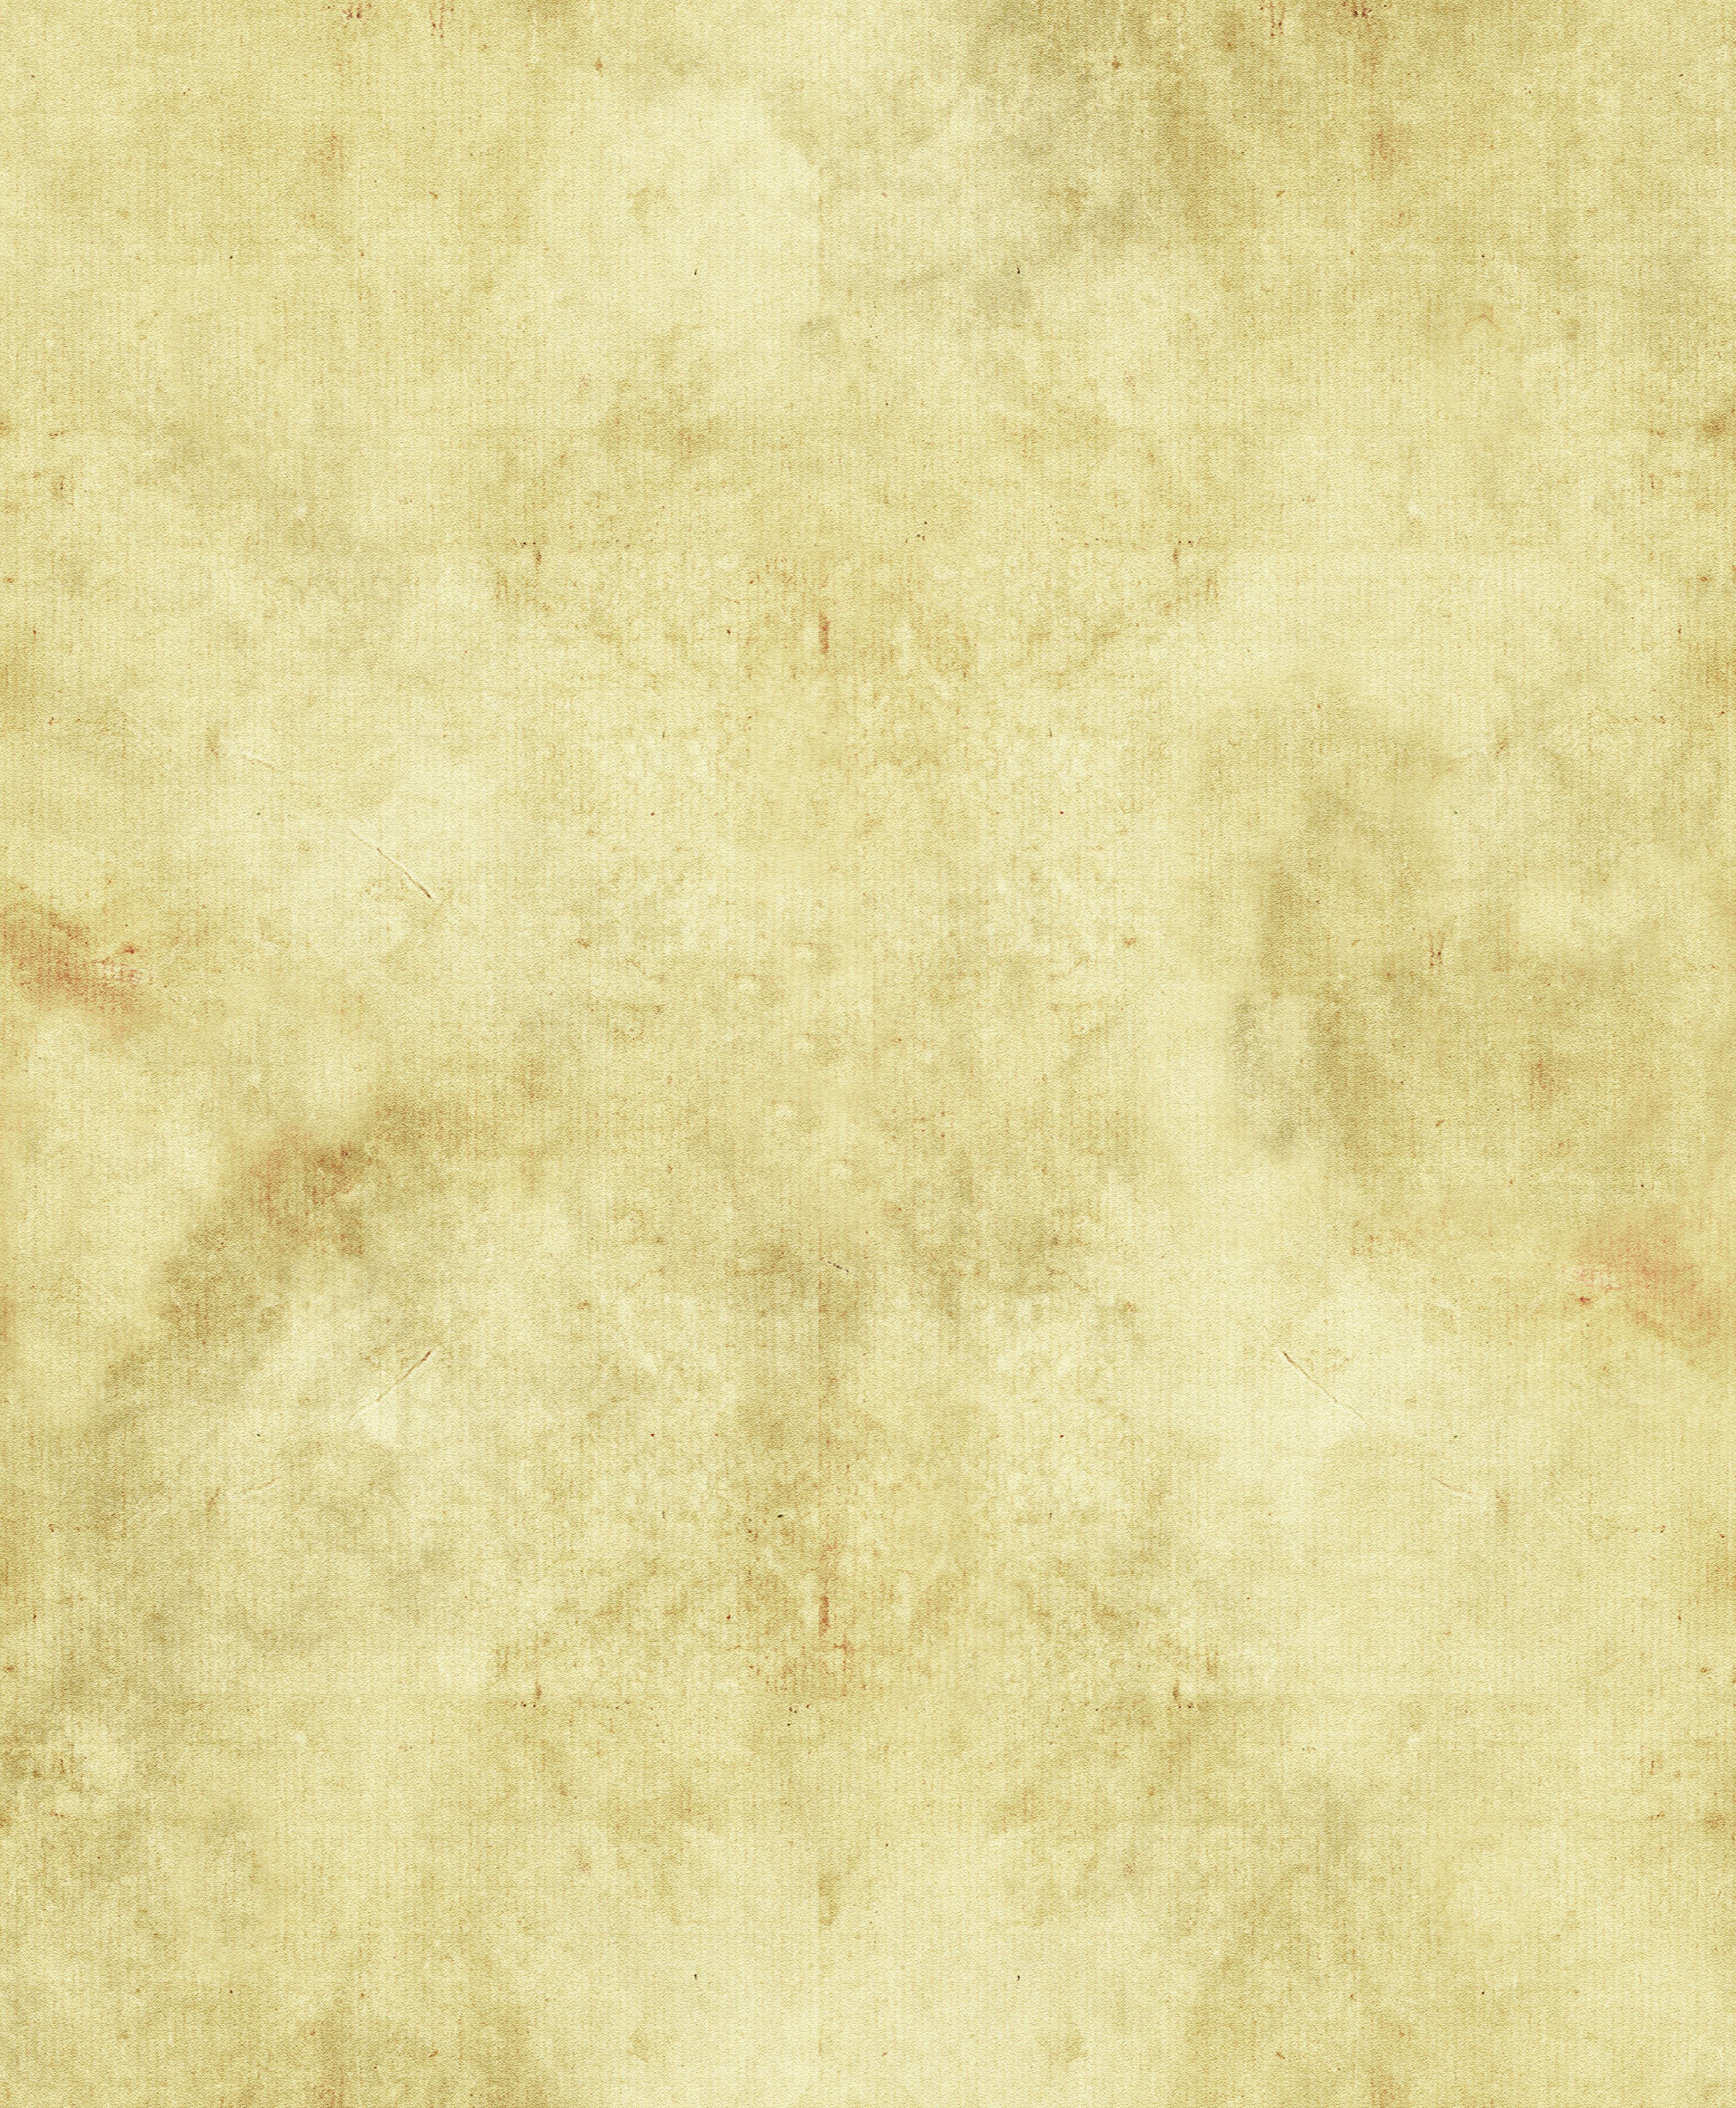 Old worn out parchment paper texture or background Stock Photo - Alamy